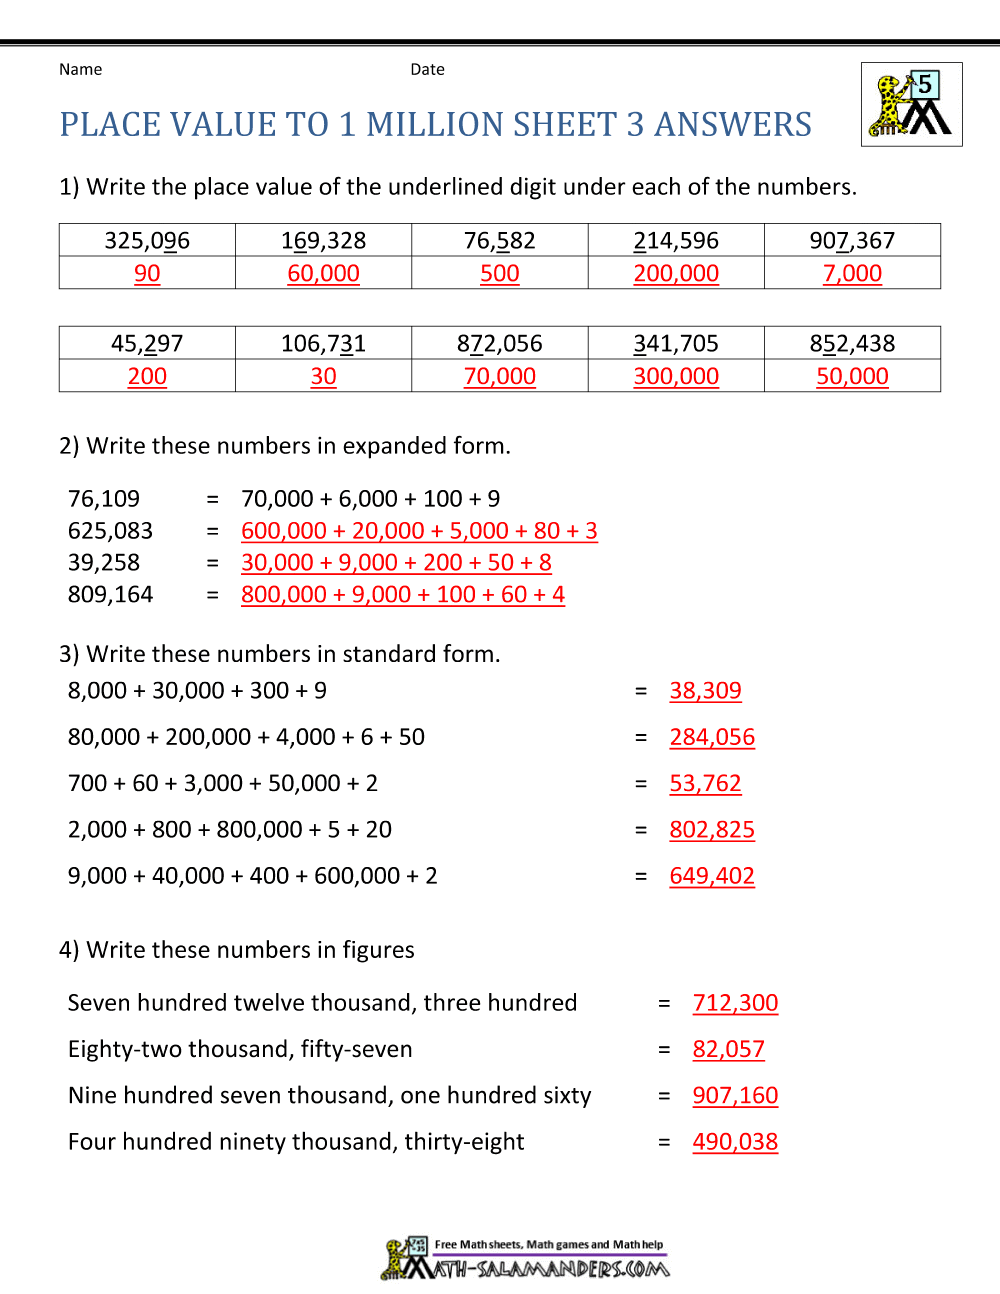 Place Value Worksheet - up to 29 million